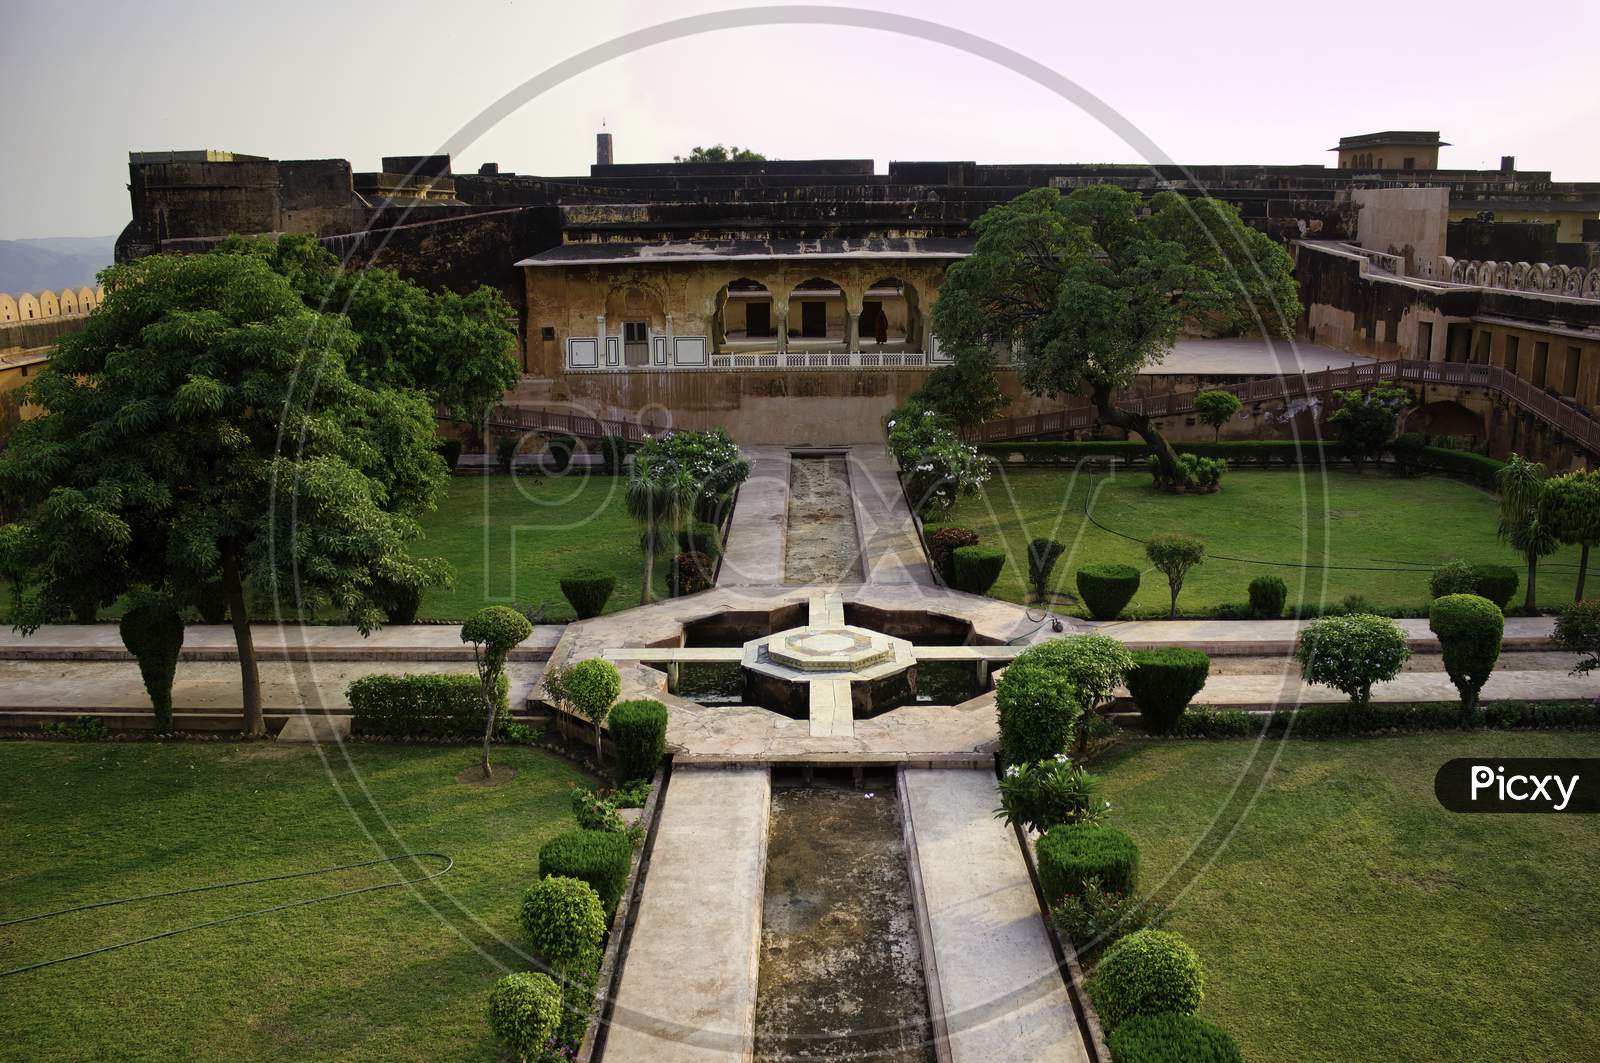 Interior Of A Royal Garden Inside A Fort Located In Jaipur City Of Rajasthan State In India